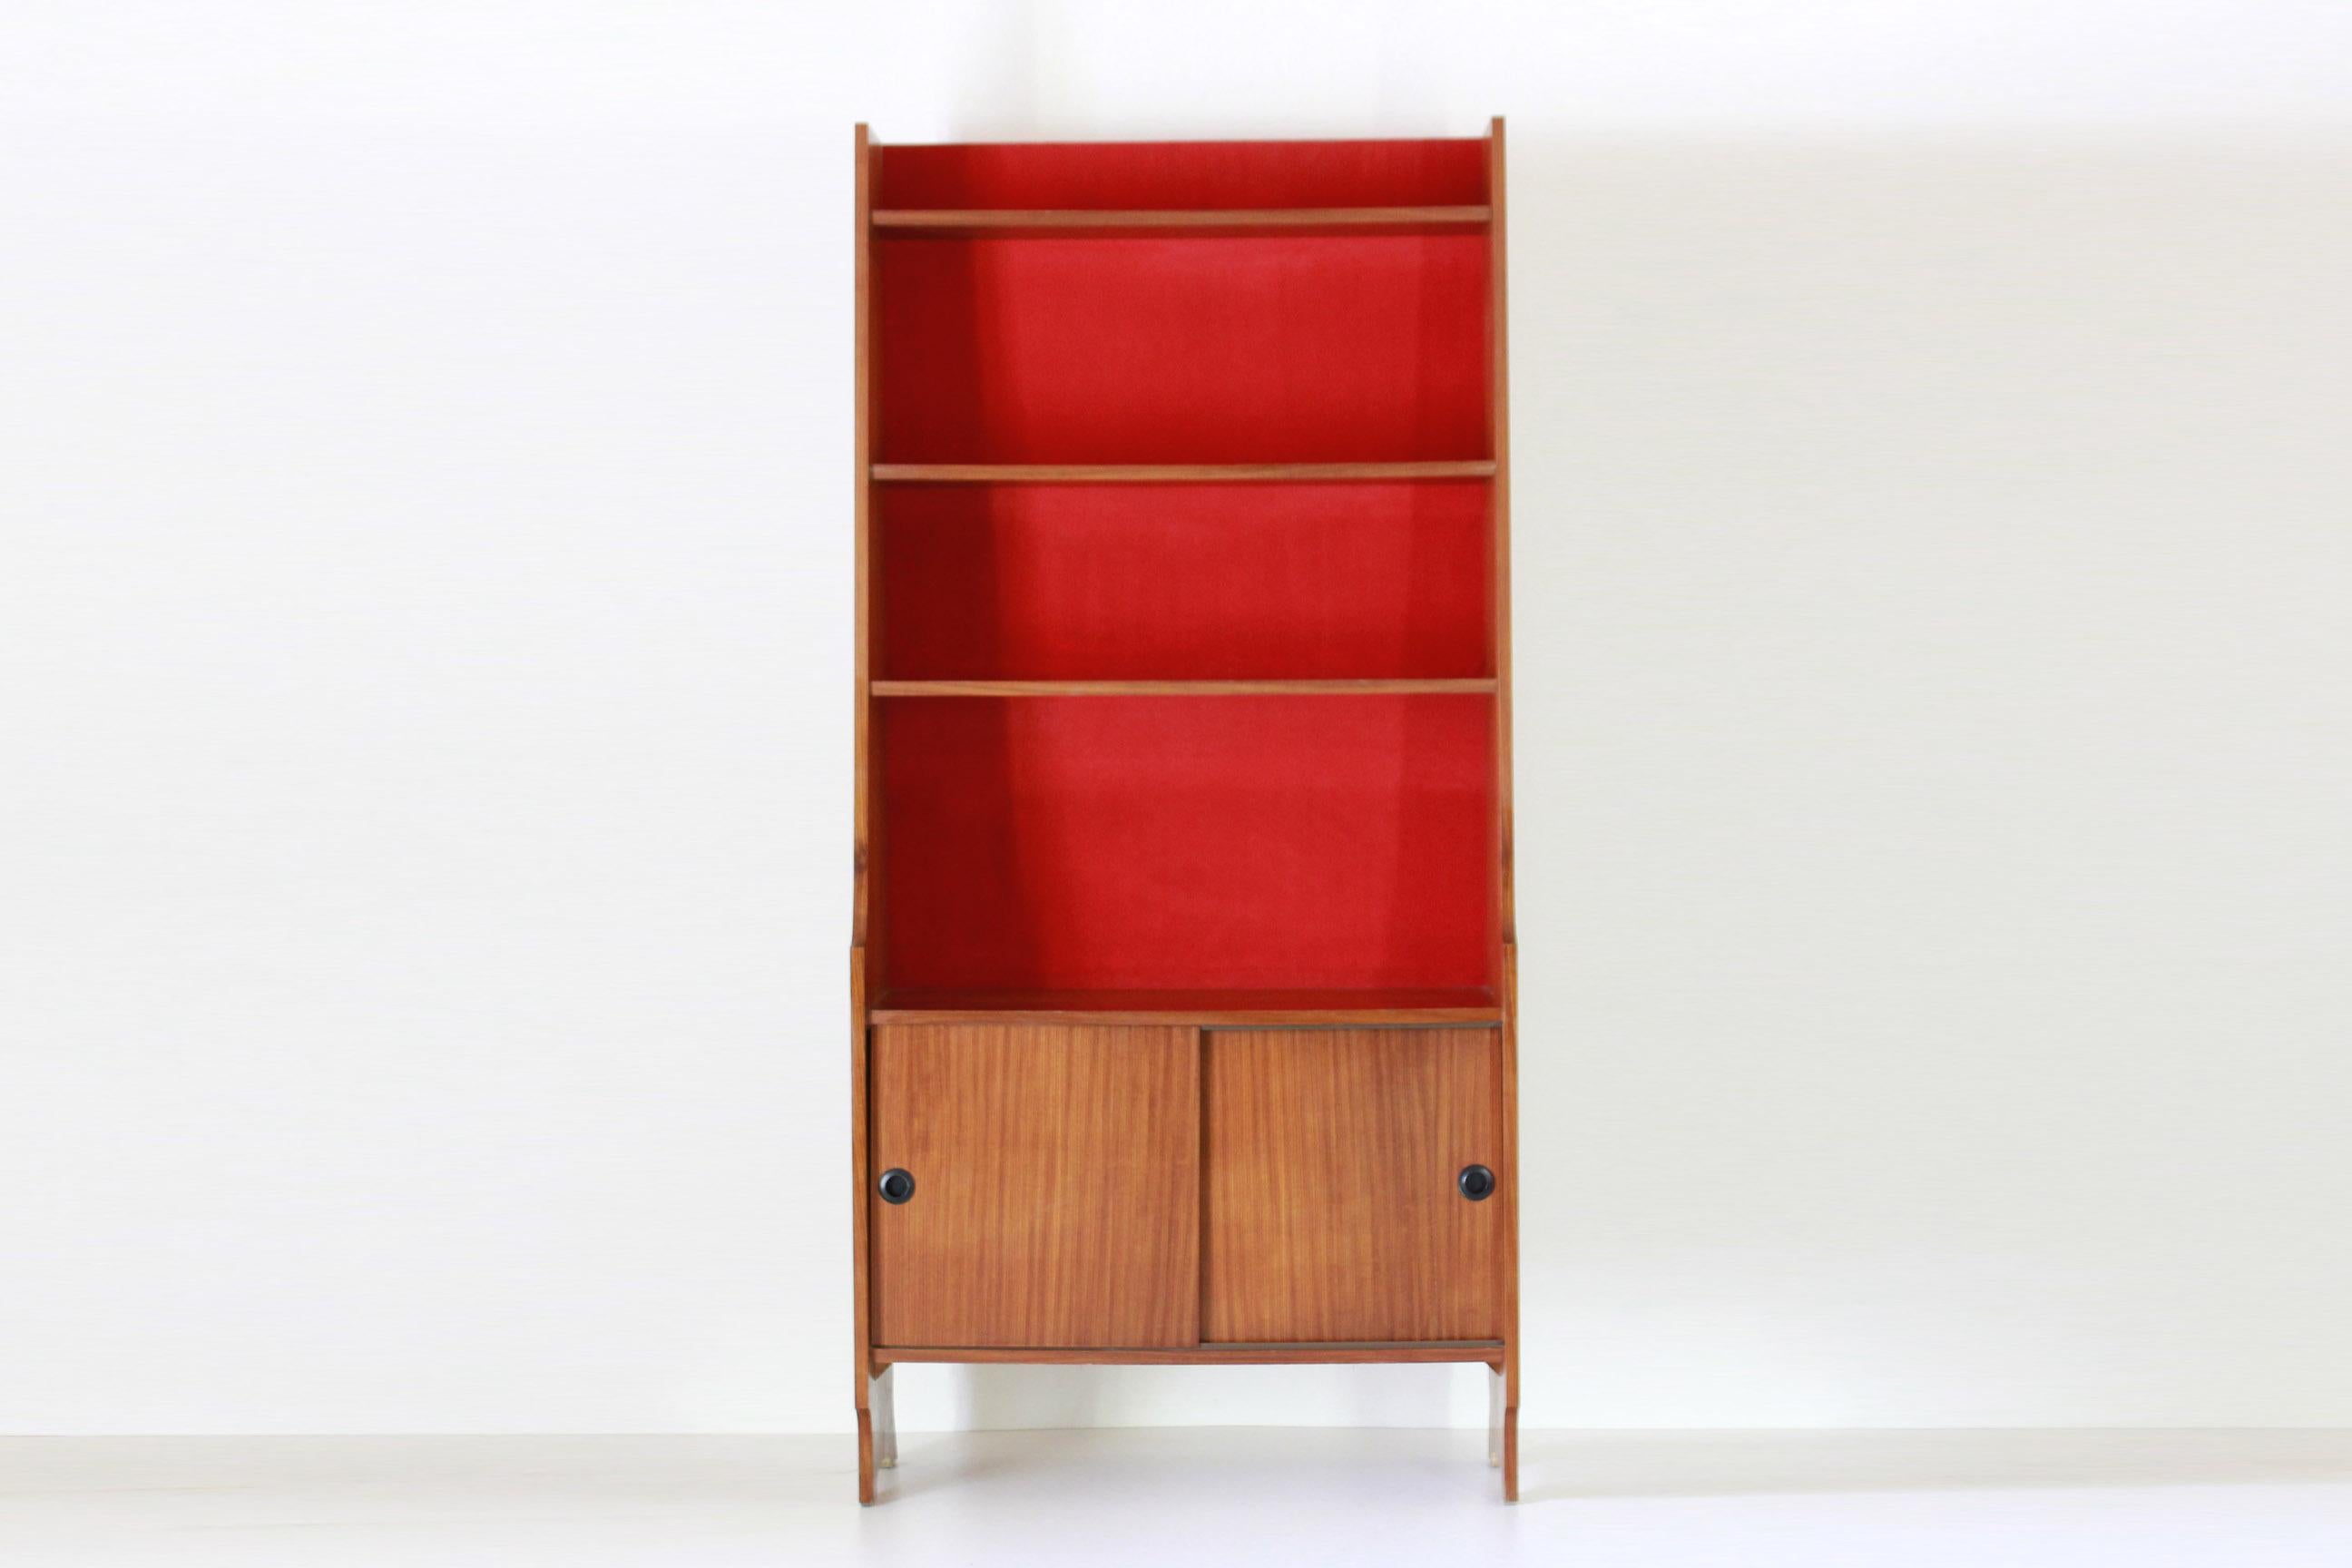 Velvet vintage Book shelf, teak and velvet, Modular Structure, italy 1950s.
A 1960s vintage modular bookcase with teak and red velvet structure. The item is composed by two modules that can be also settled separately from each other. Classic italian